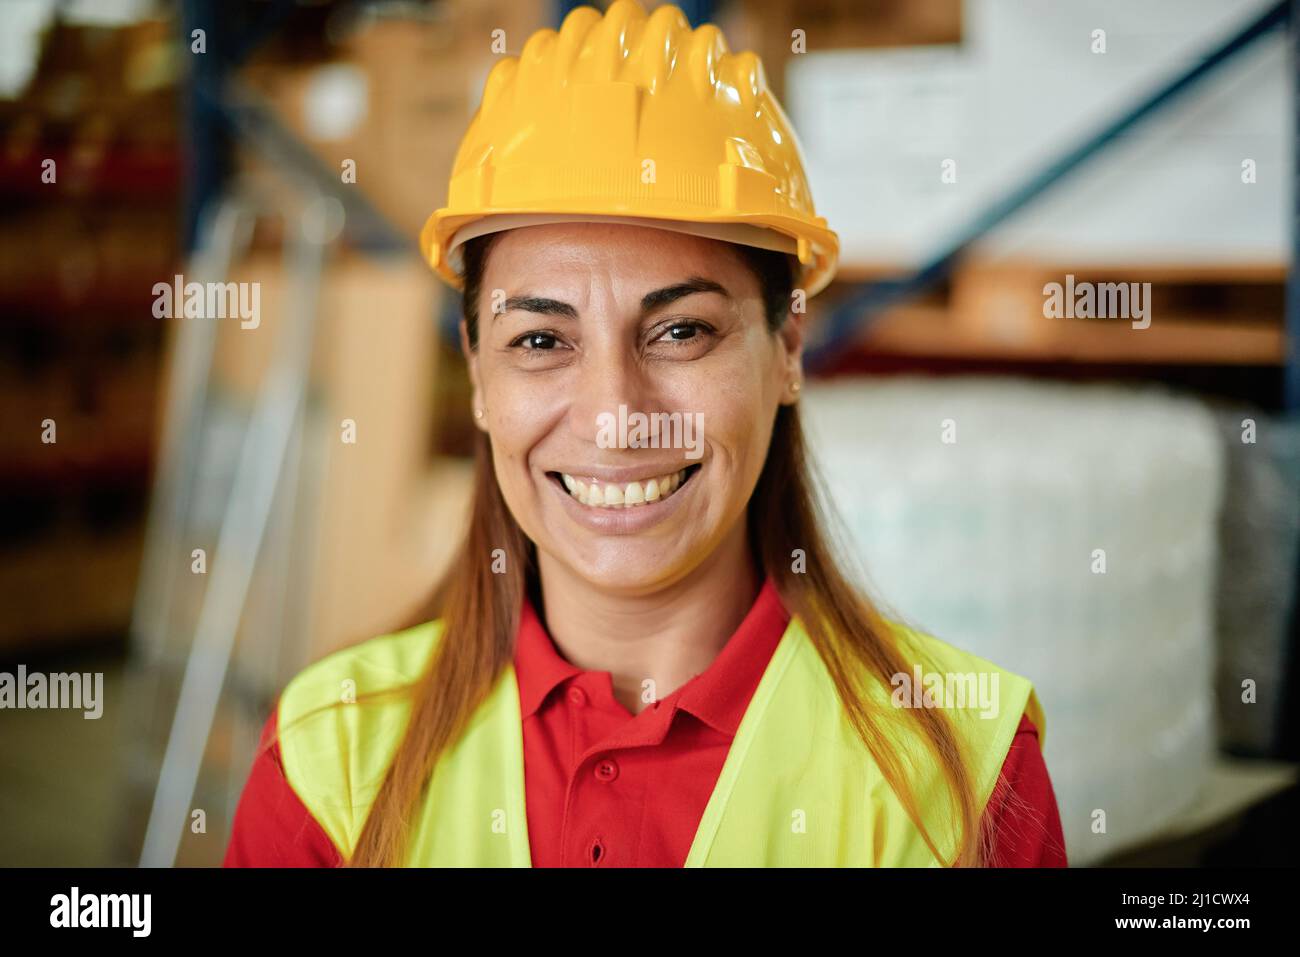 Portrait of a happy adult Caucasian working woman looking at the camera inside a warehouse wearing a hard hat and safety clothing - Focus on the Face Stock Photo